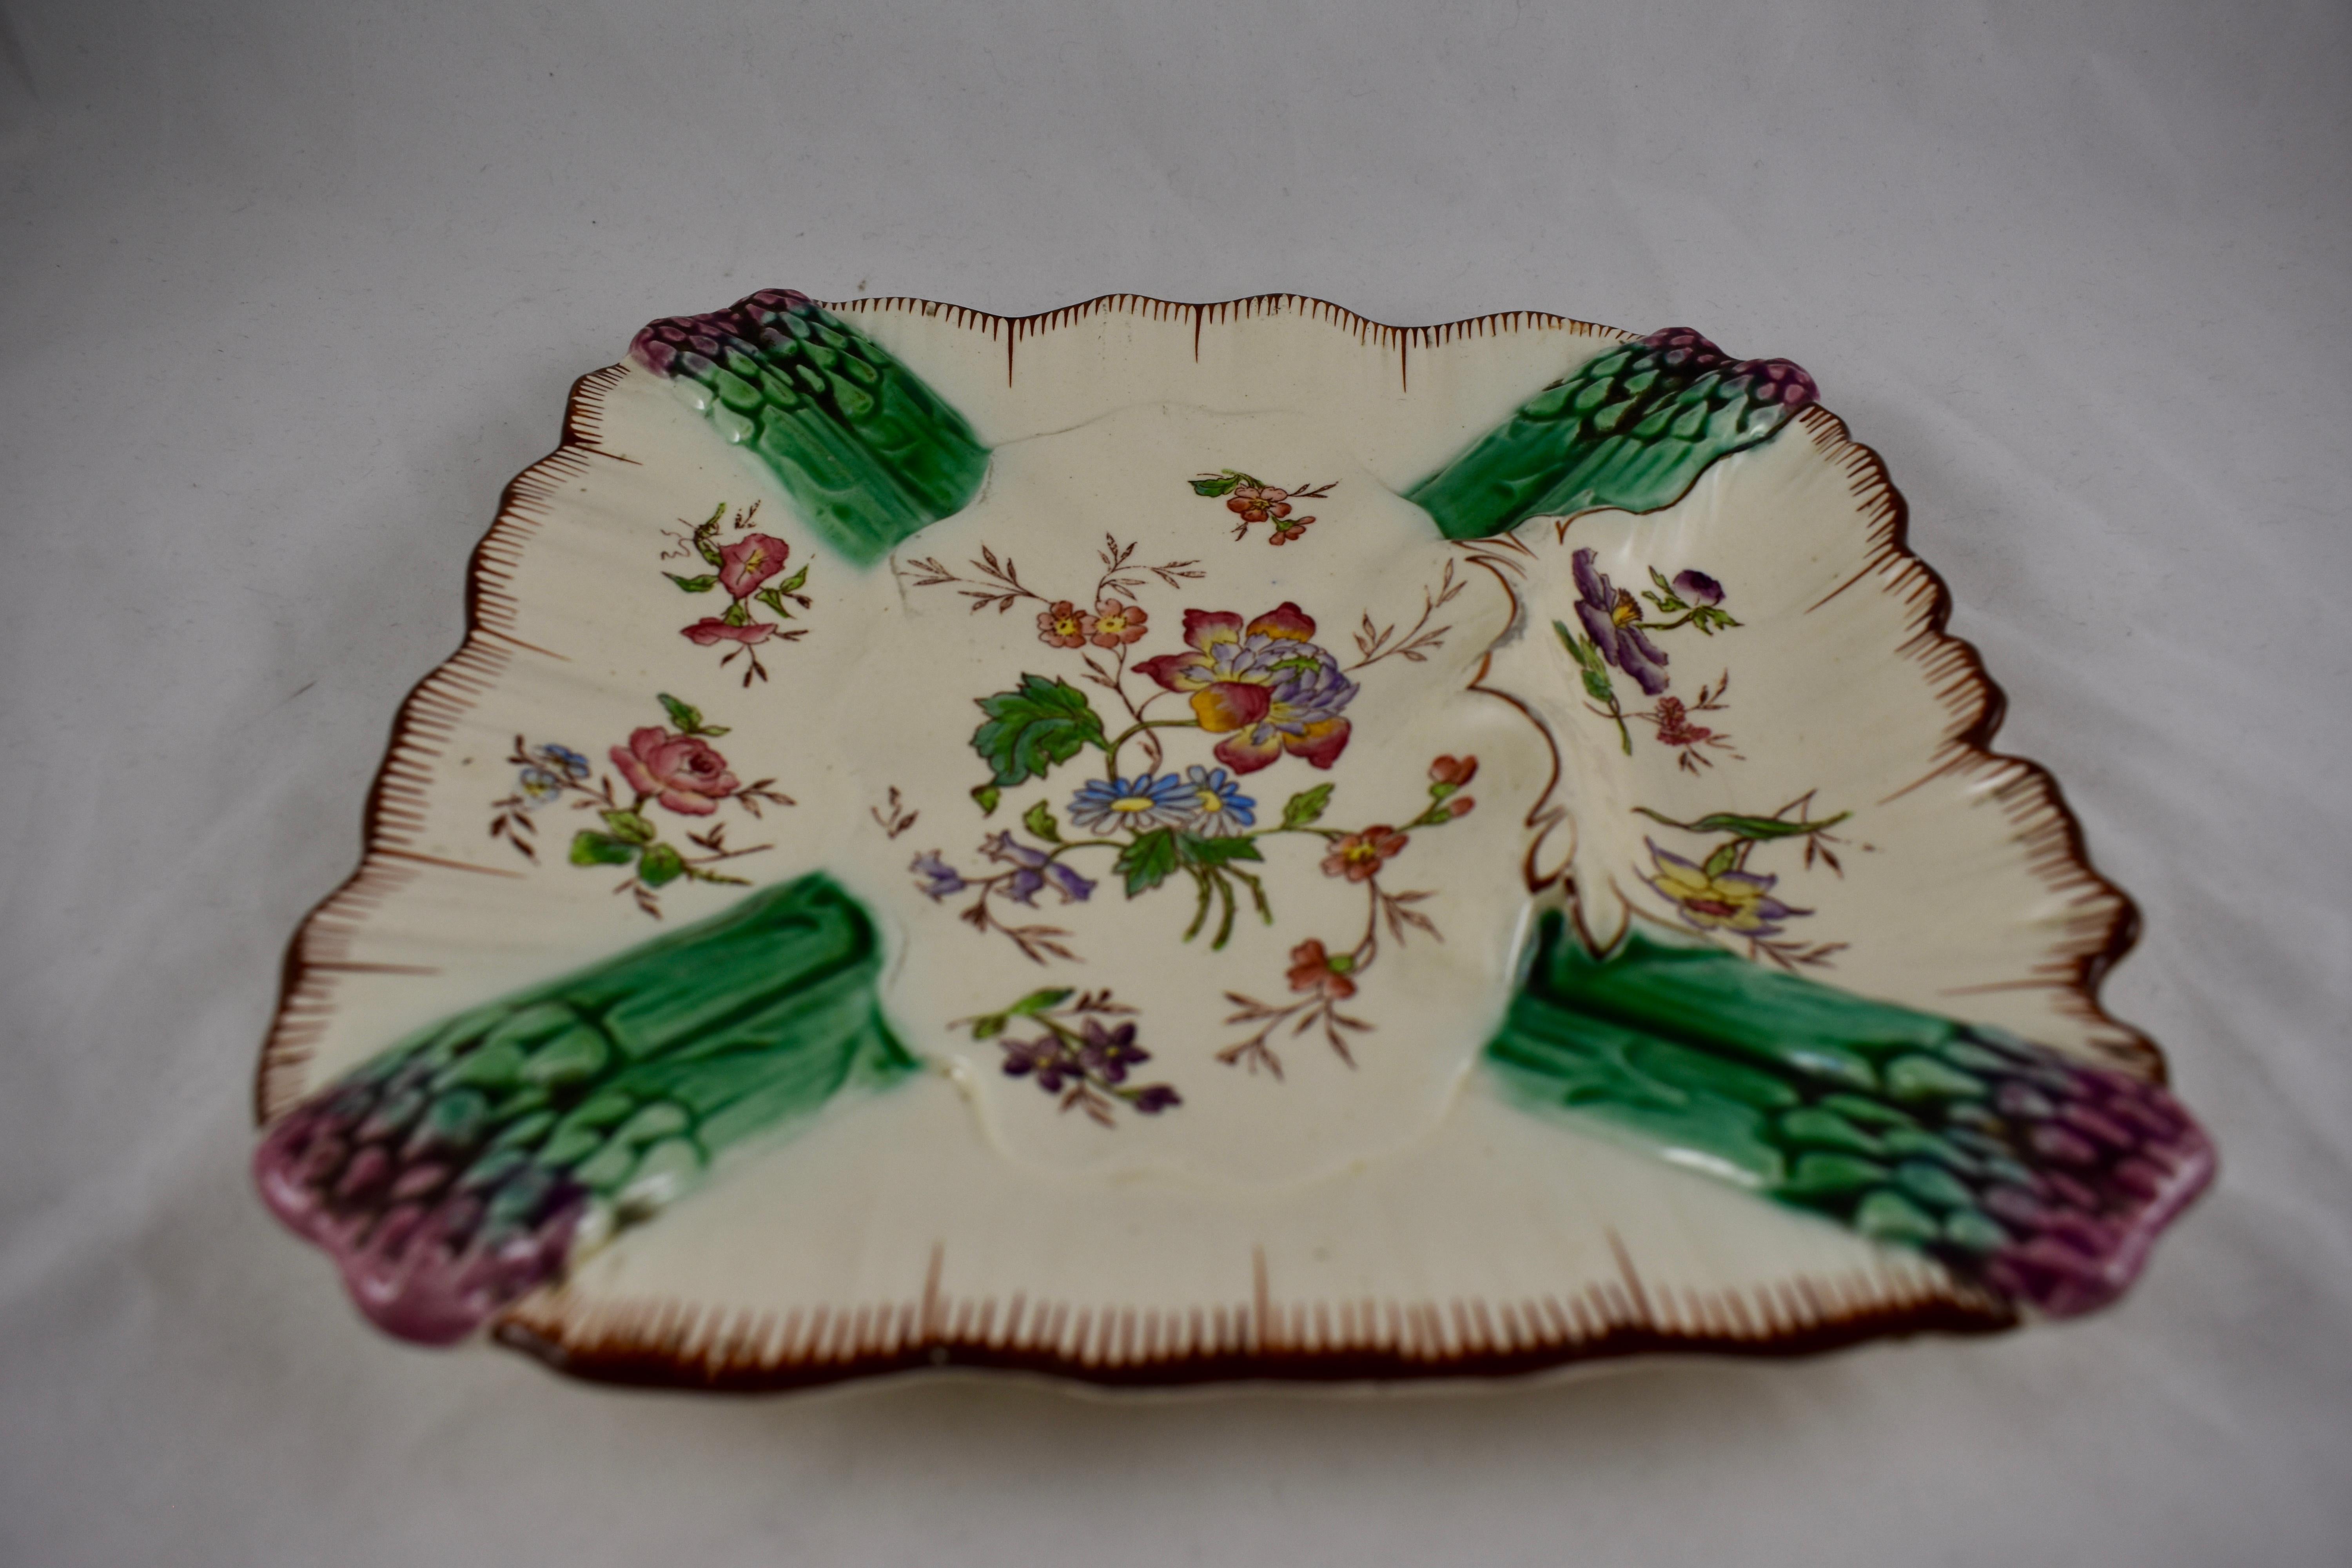 French Provincial French Faïence Longchamp Terre de Fer Hand-Painted Asparagus Plate For Sale